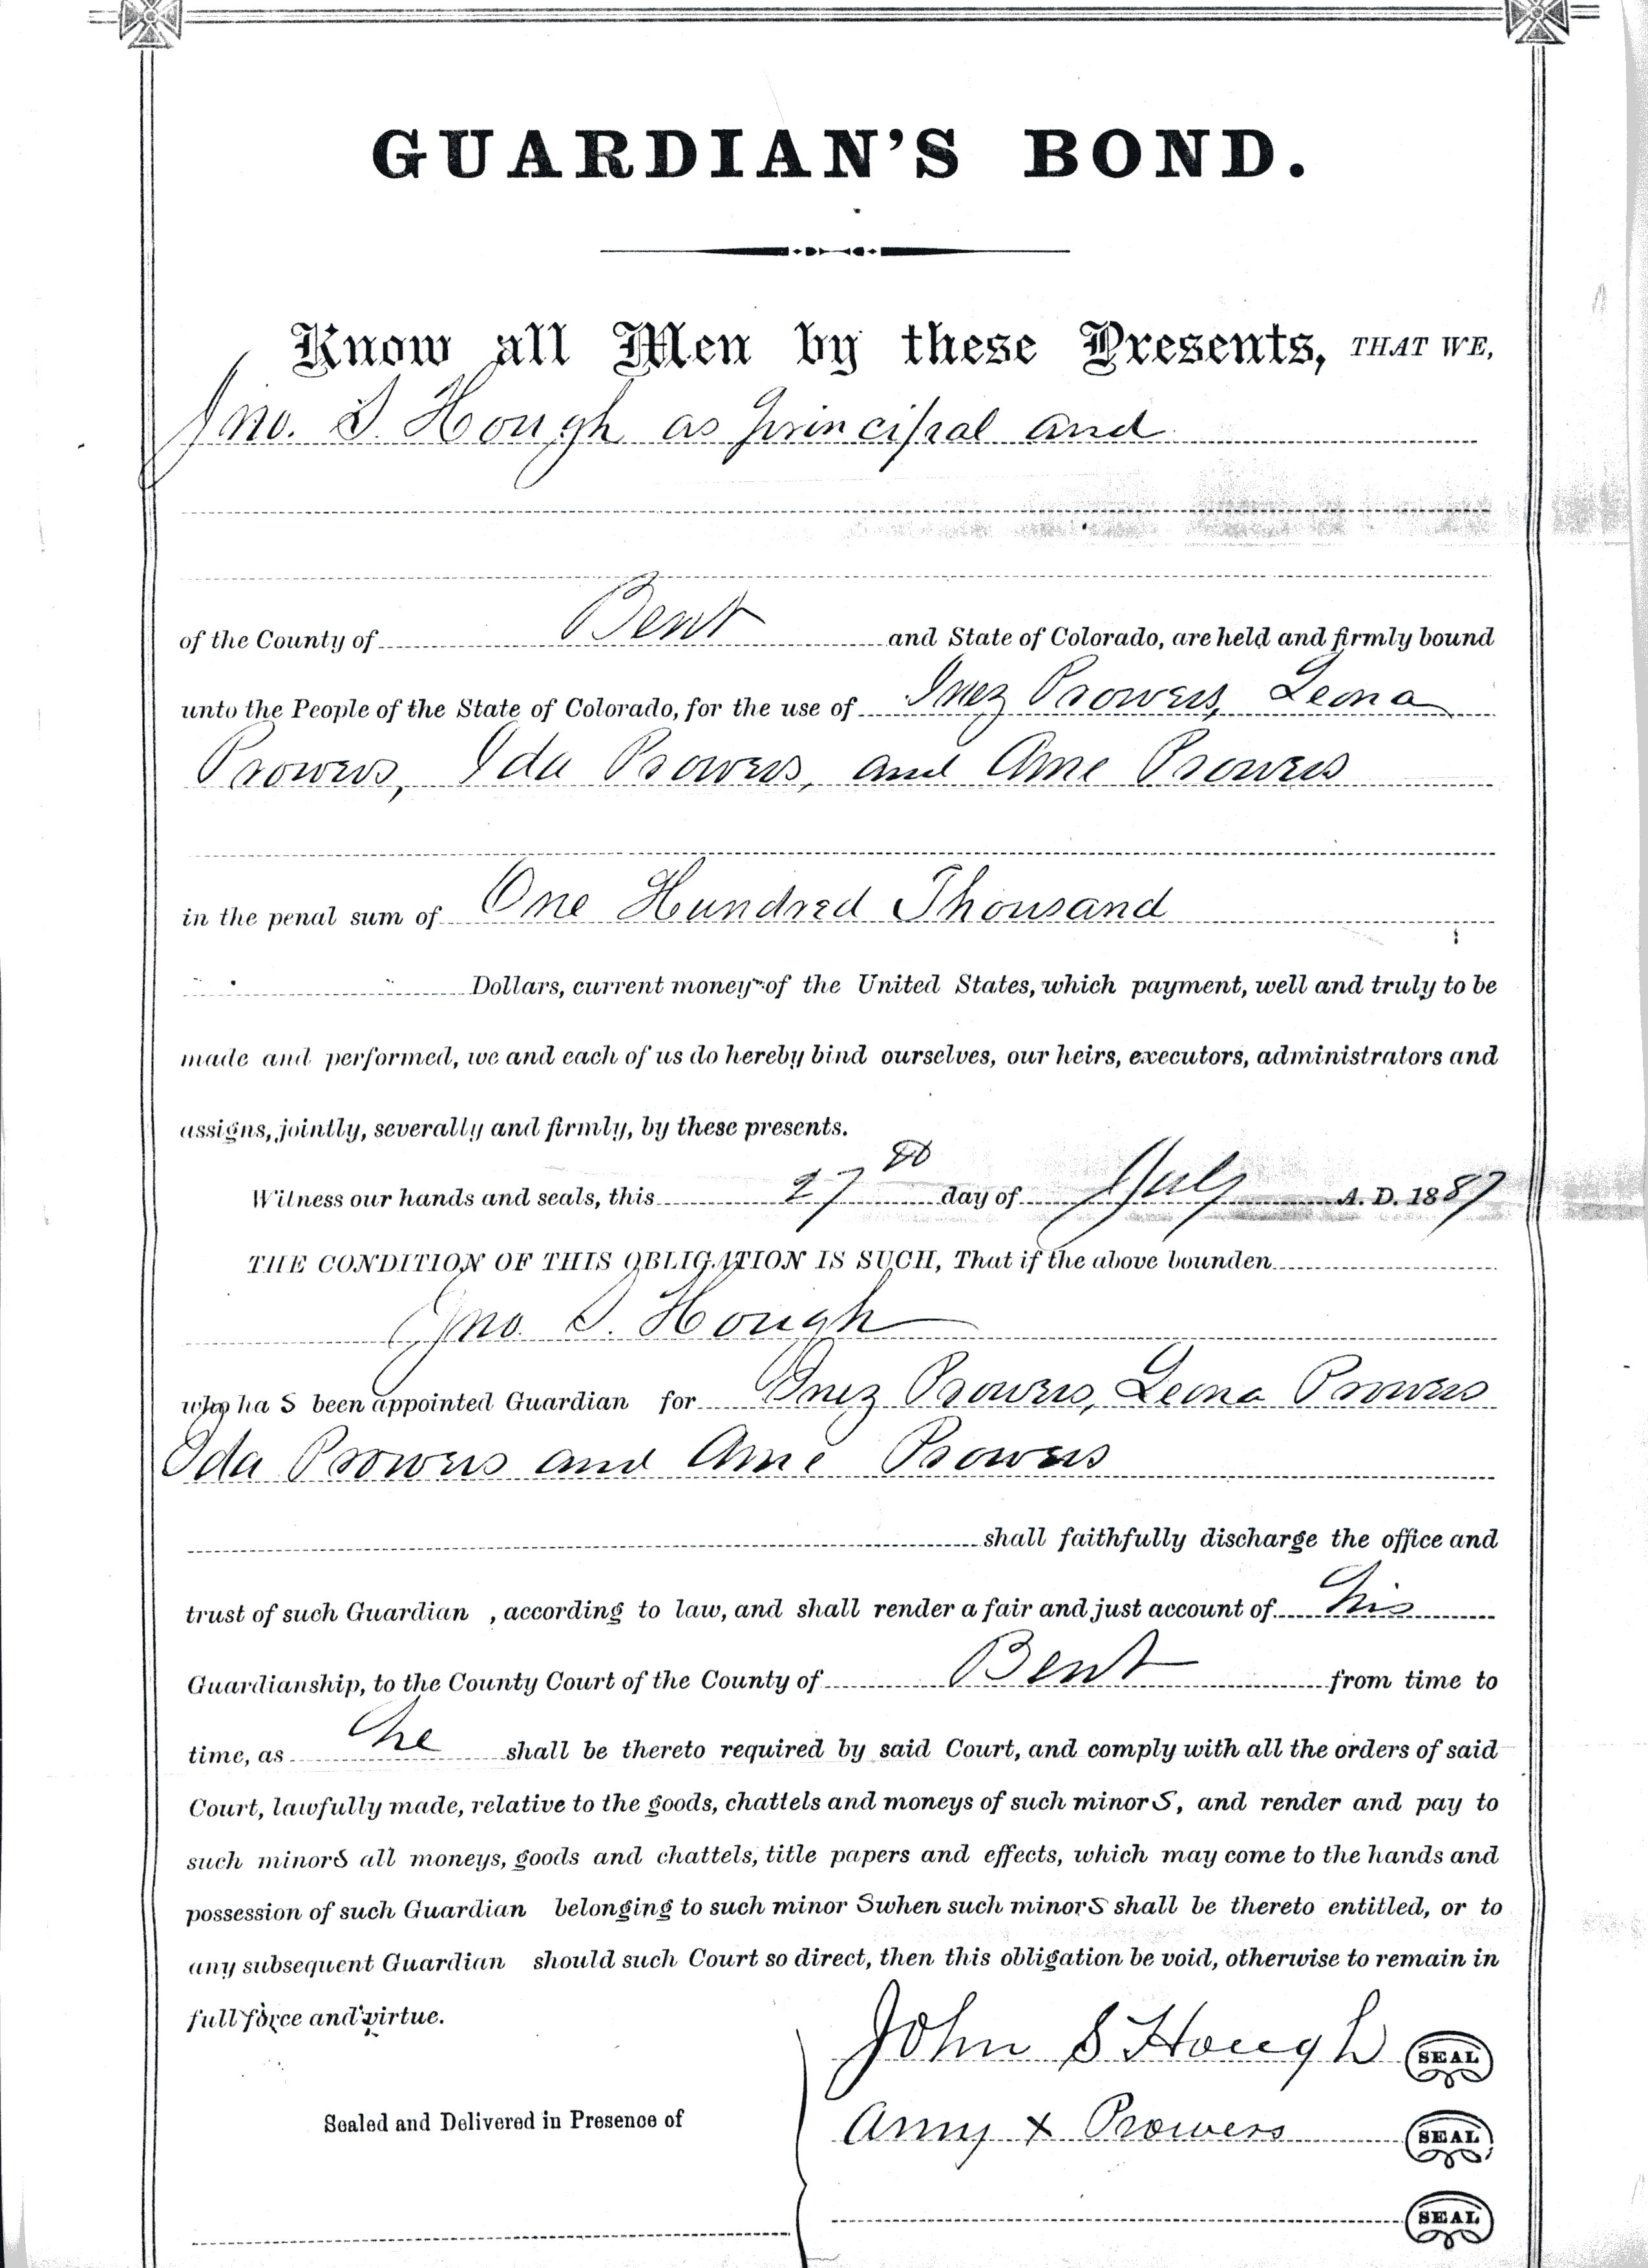 Photo of a legal document from 1887. The document is a Guardian's Bond, and was intended for signature by Amache Prowers.